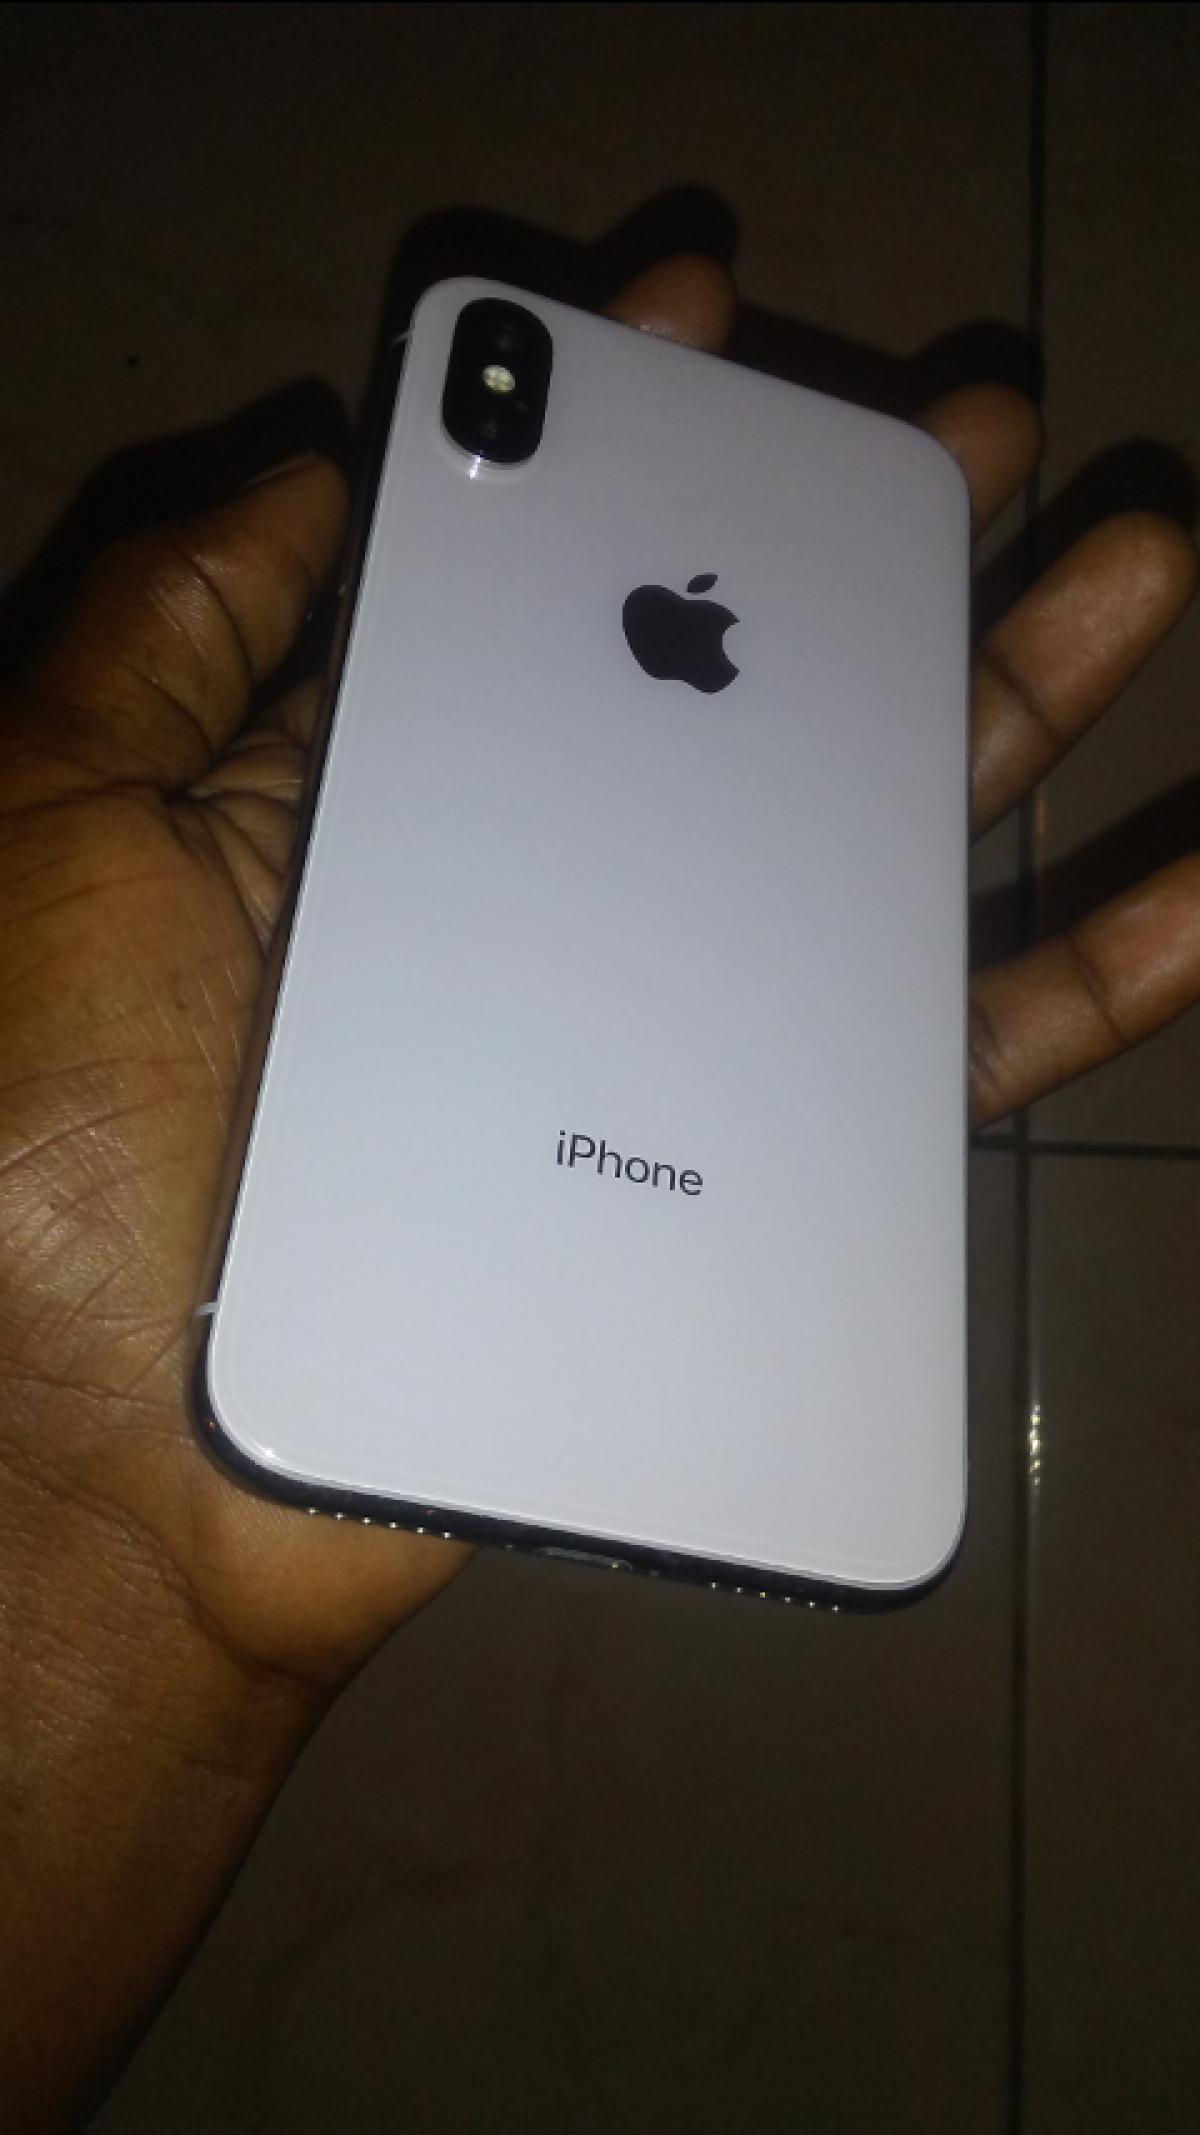 Iphone Xs Max 256 Gig for sale in May Pen Clarendon - Phones